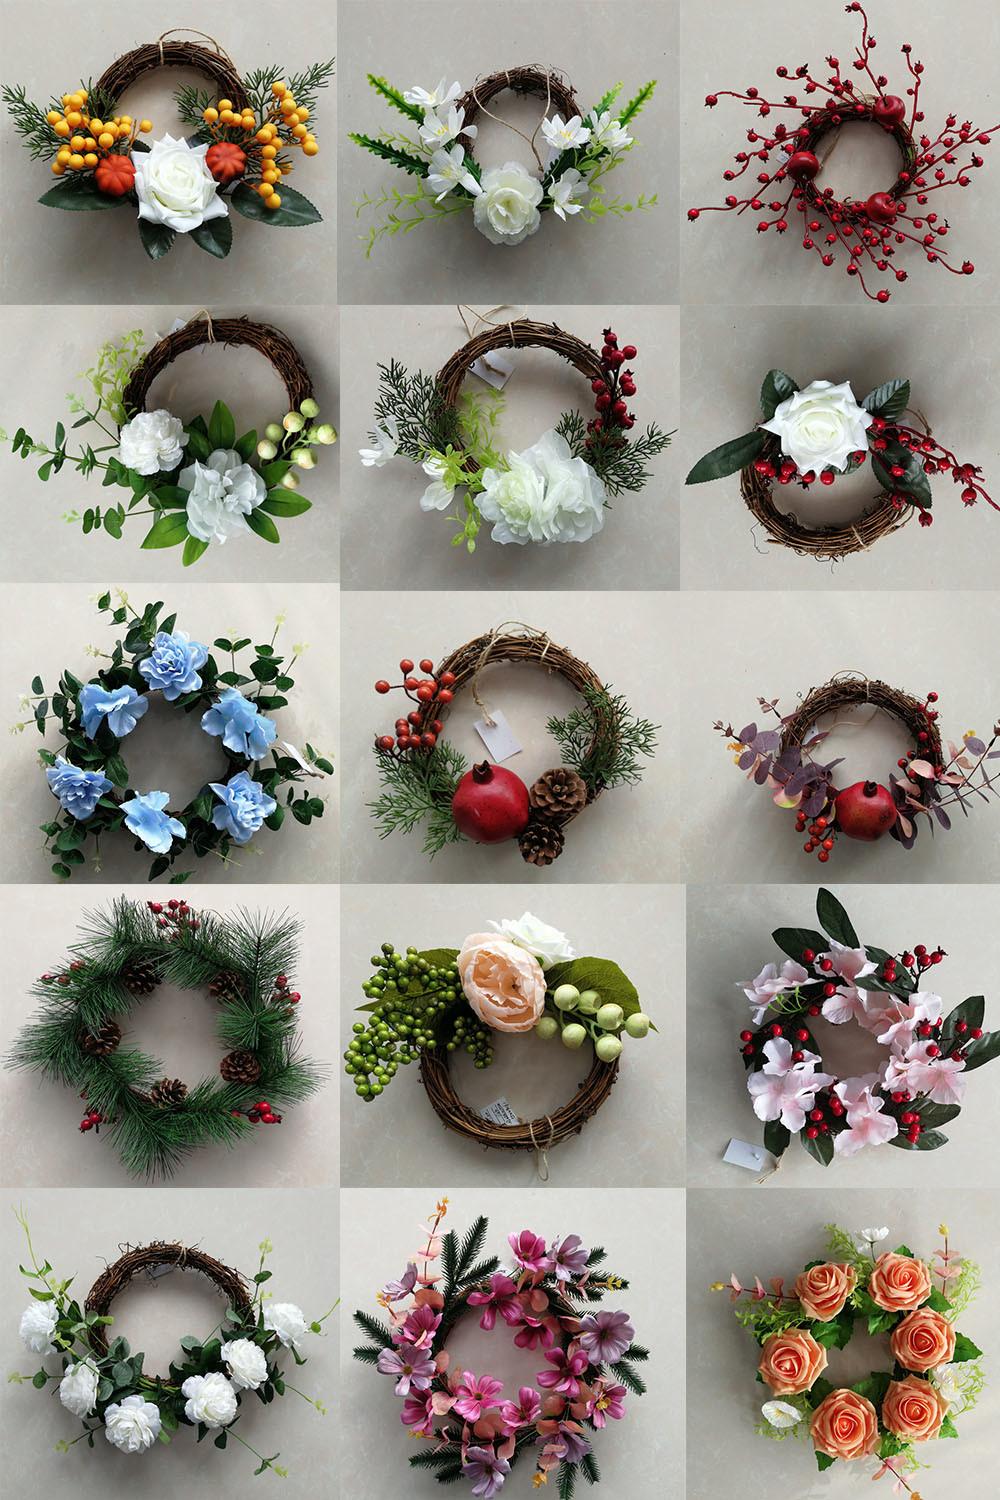 Artificial Flowers Wreath, Used for Wedding/Home Decoration, Can Be Customized